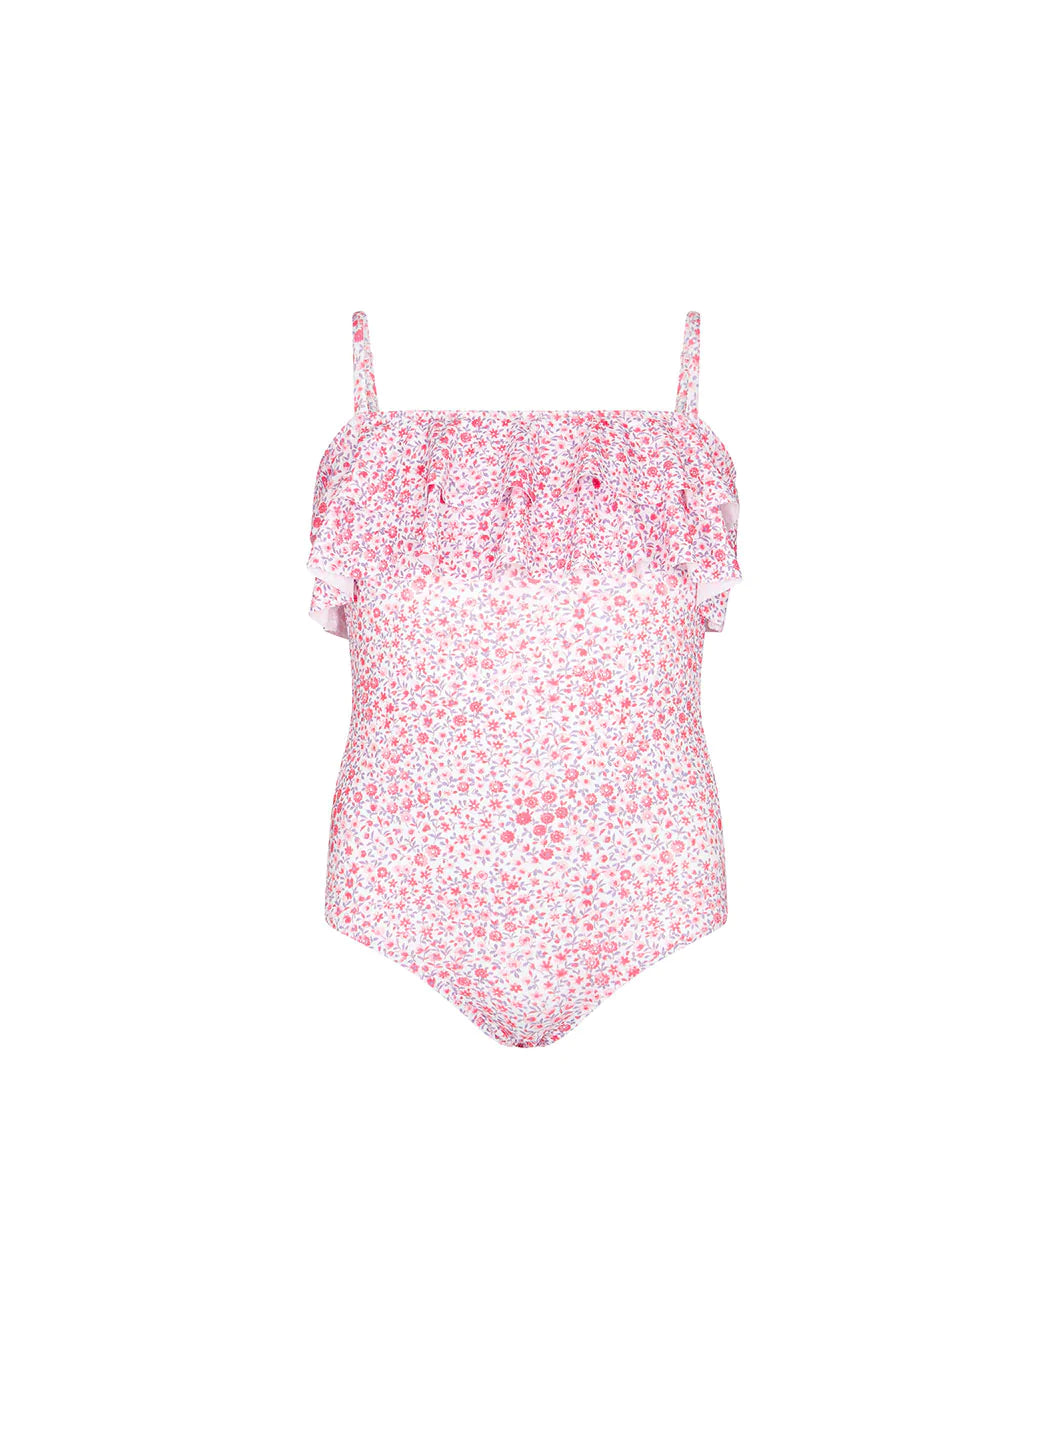 Girls_Ivy_Pink_Floral_Swimsuit_Cutout_2023